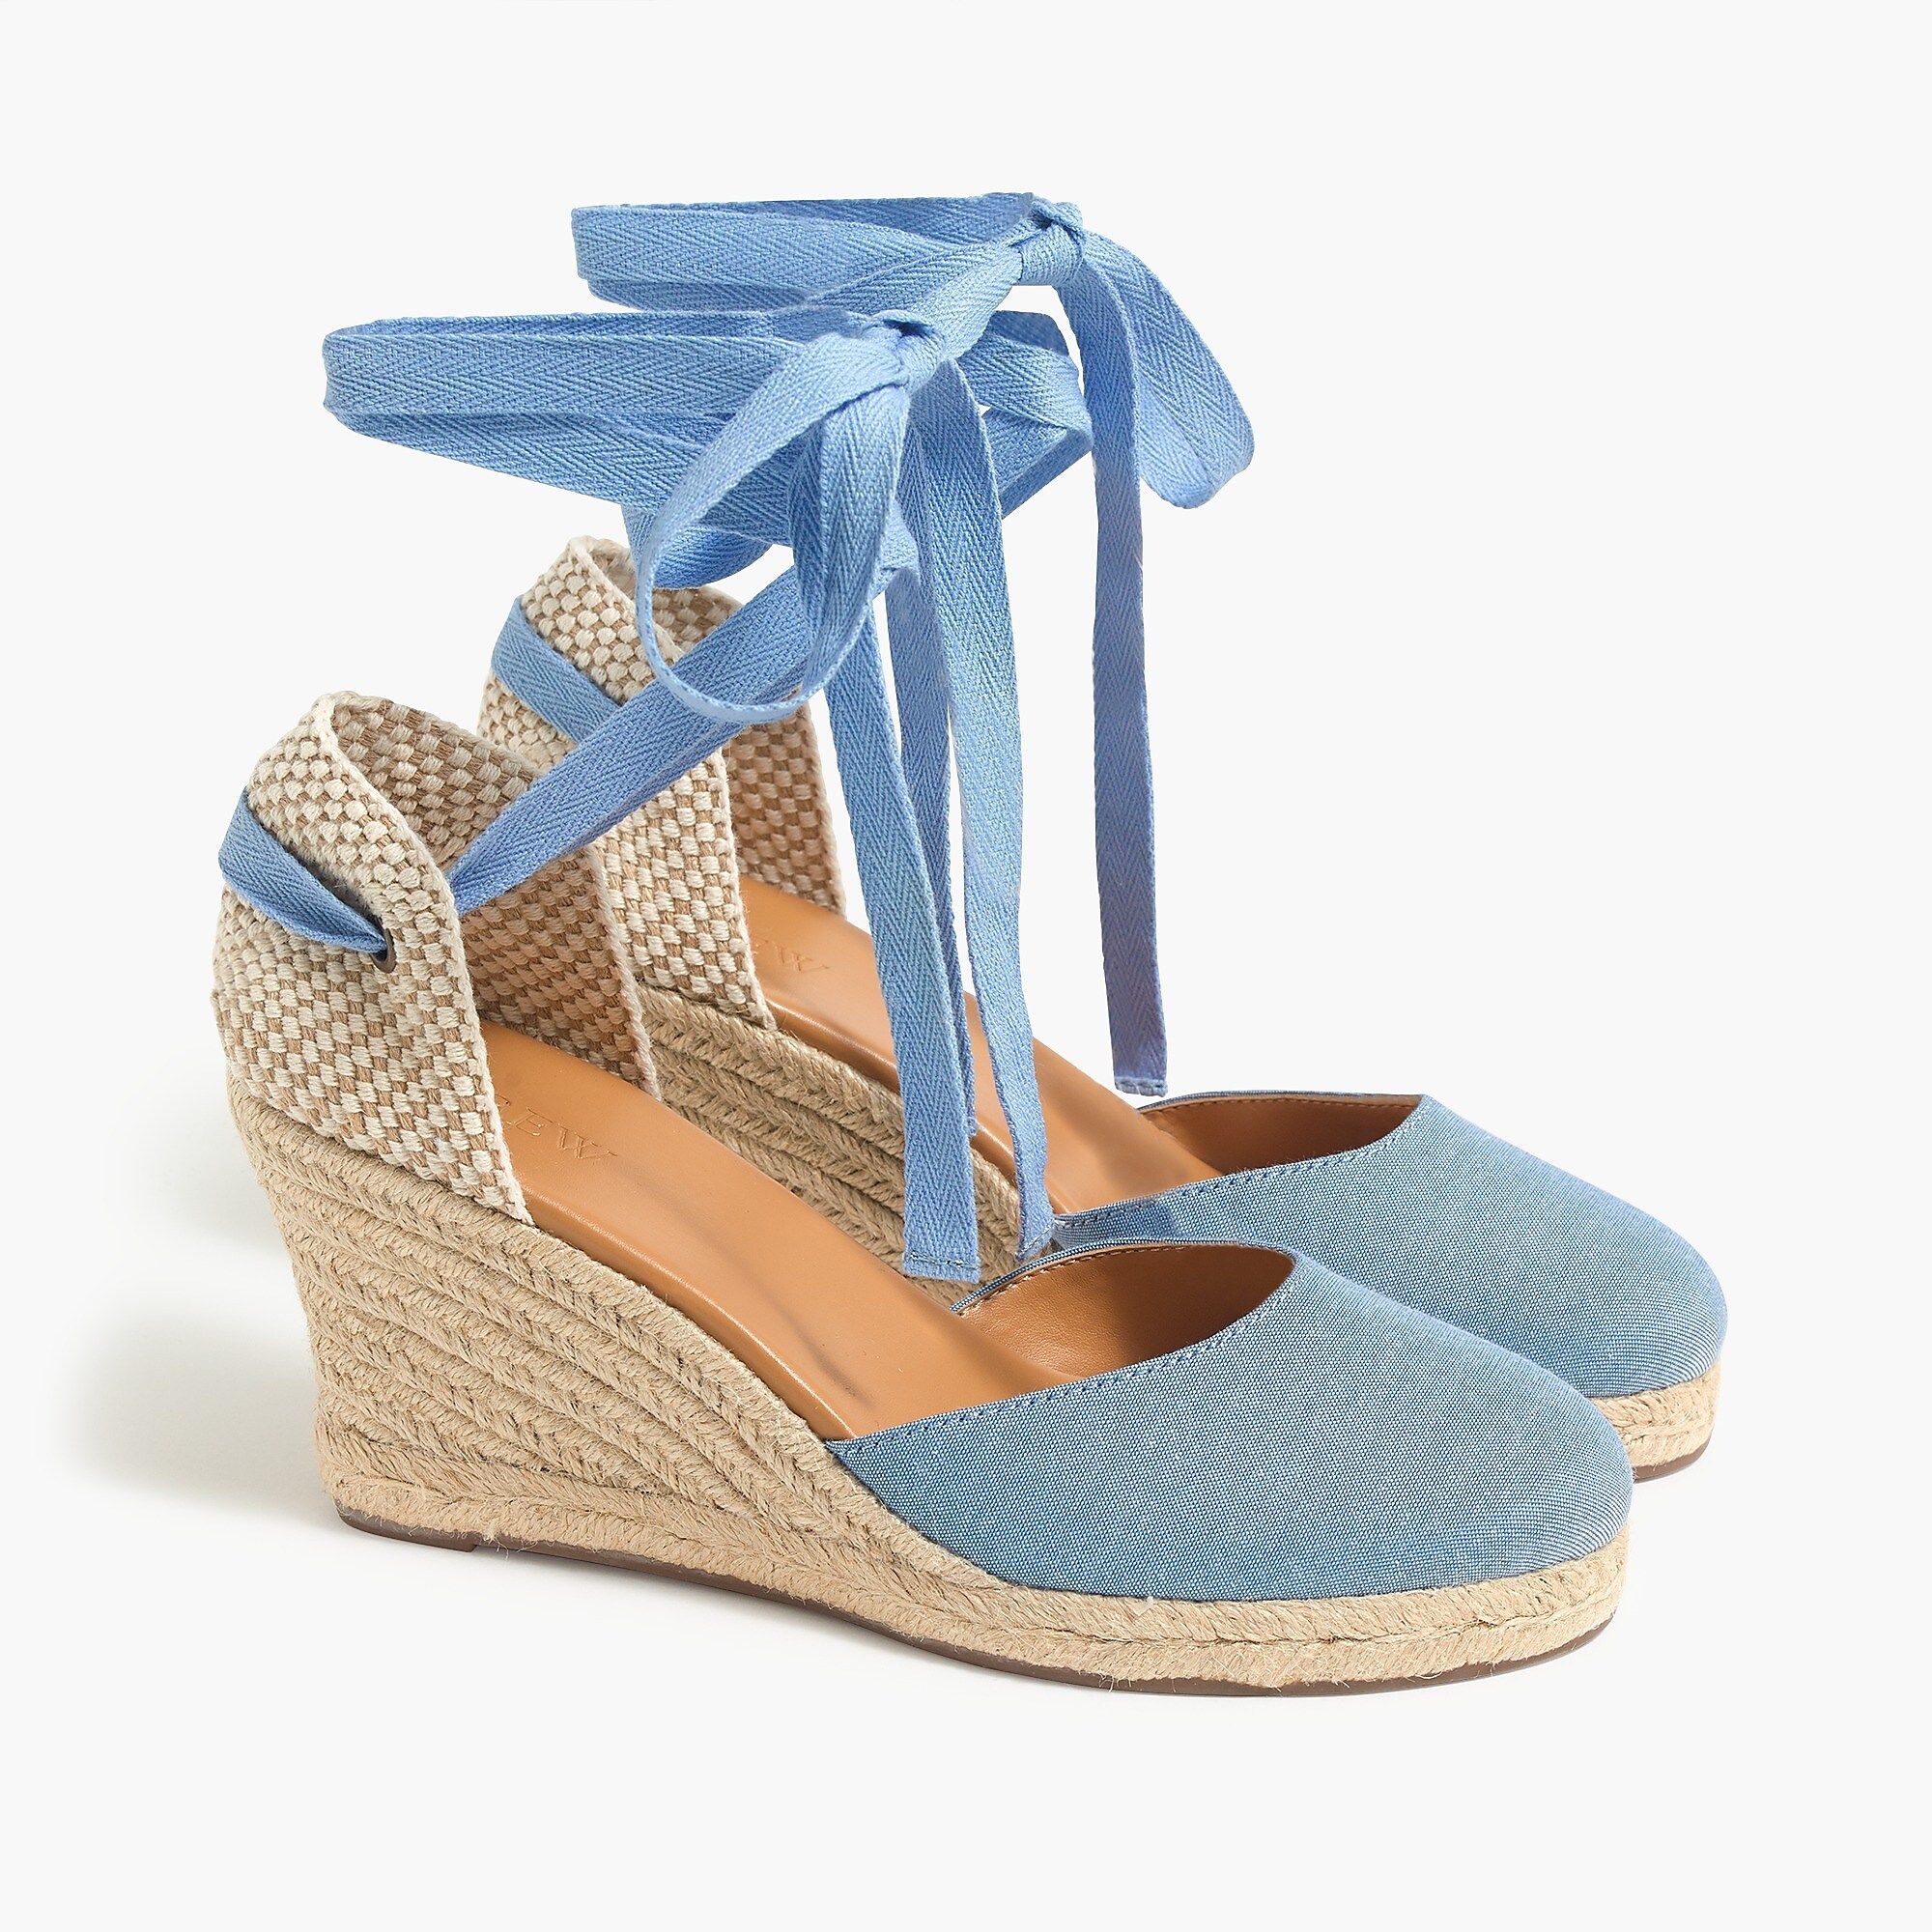 Chambray ankle-wrap espadrille wedges | J.Crew Factory